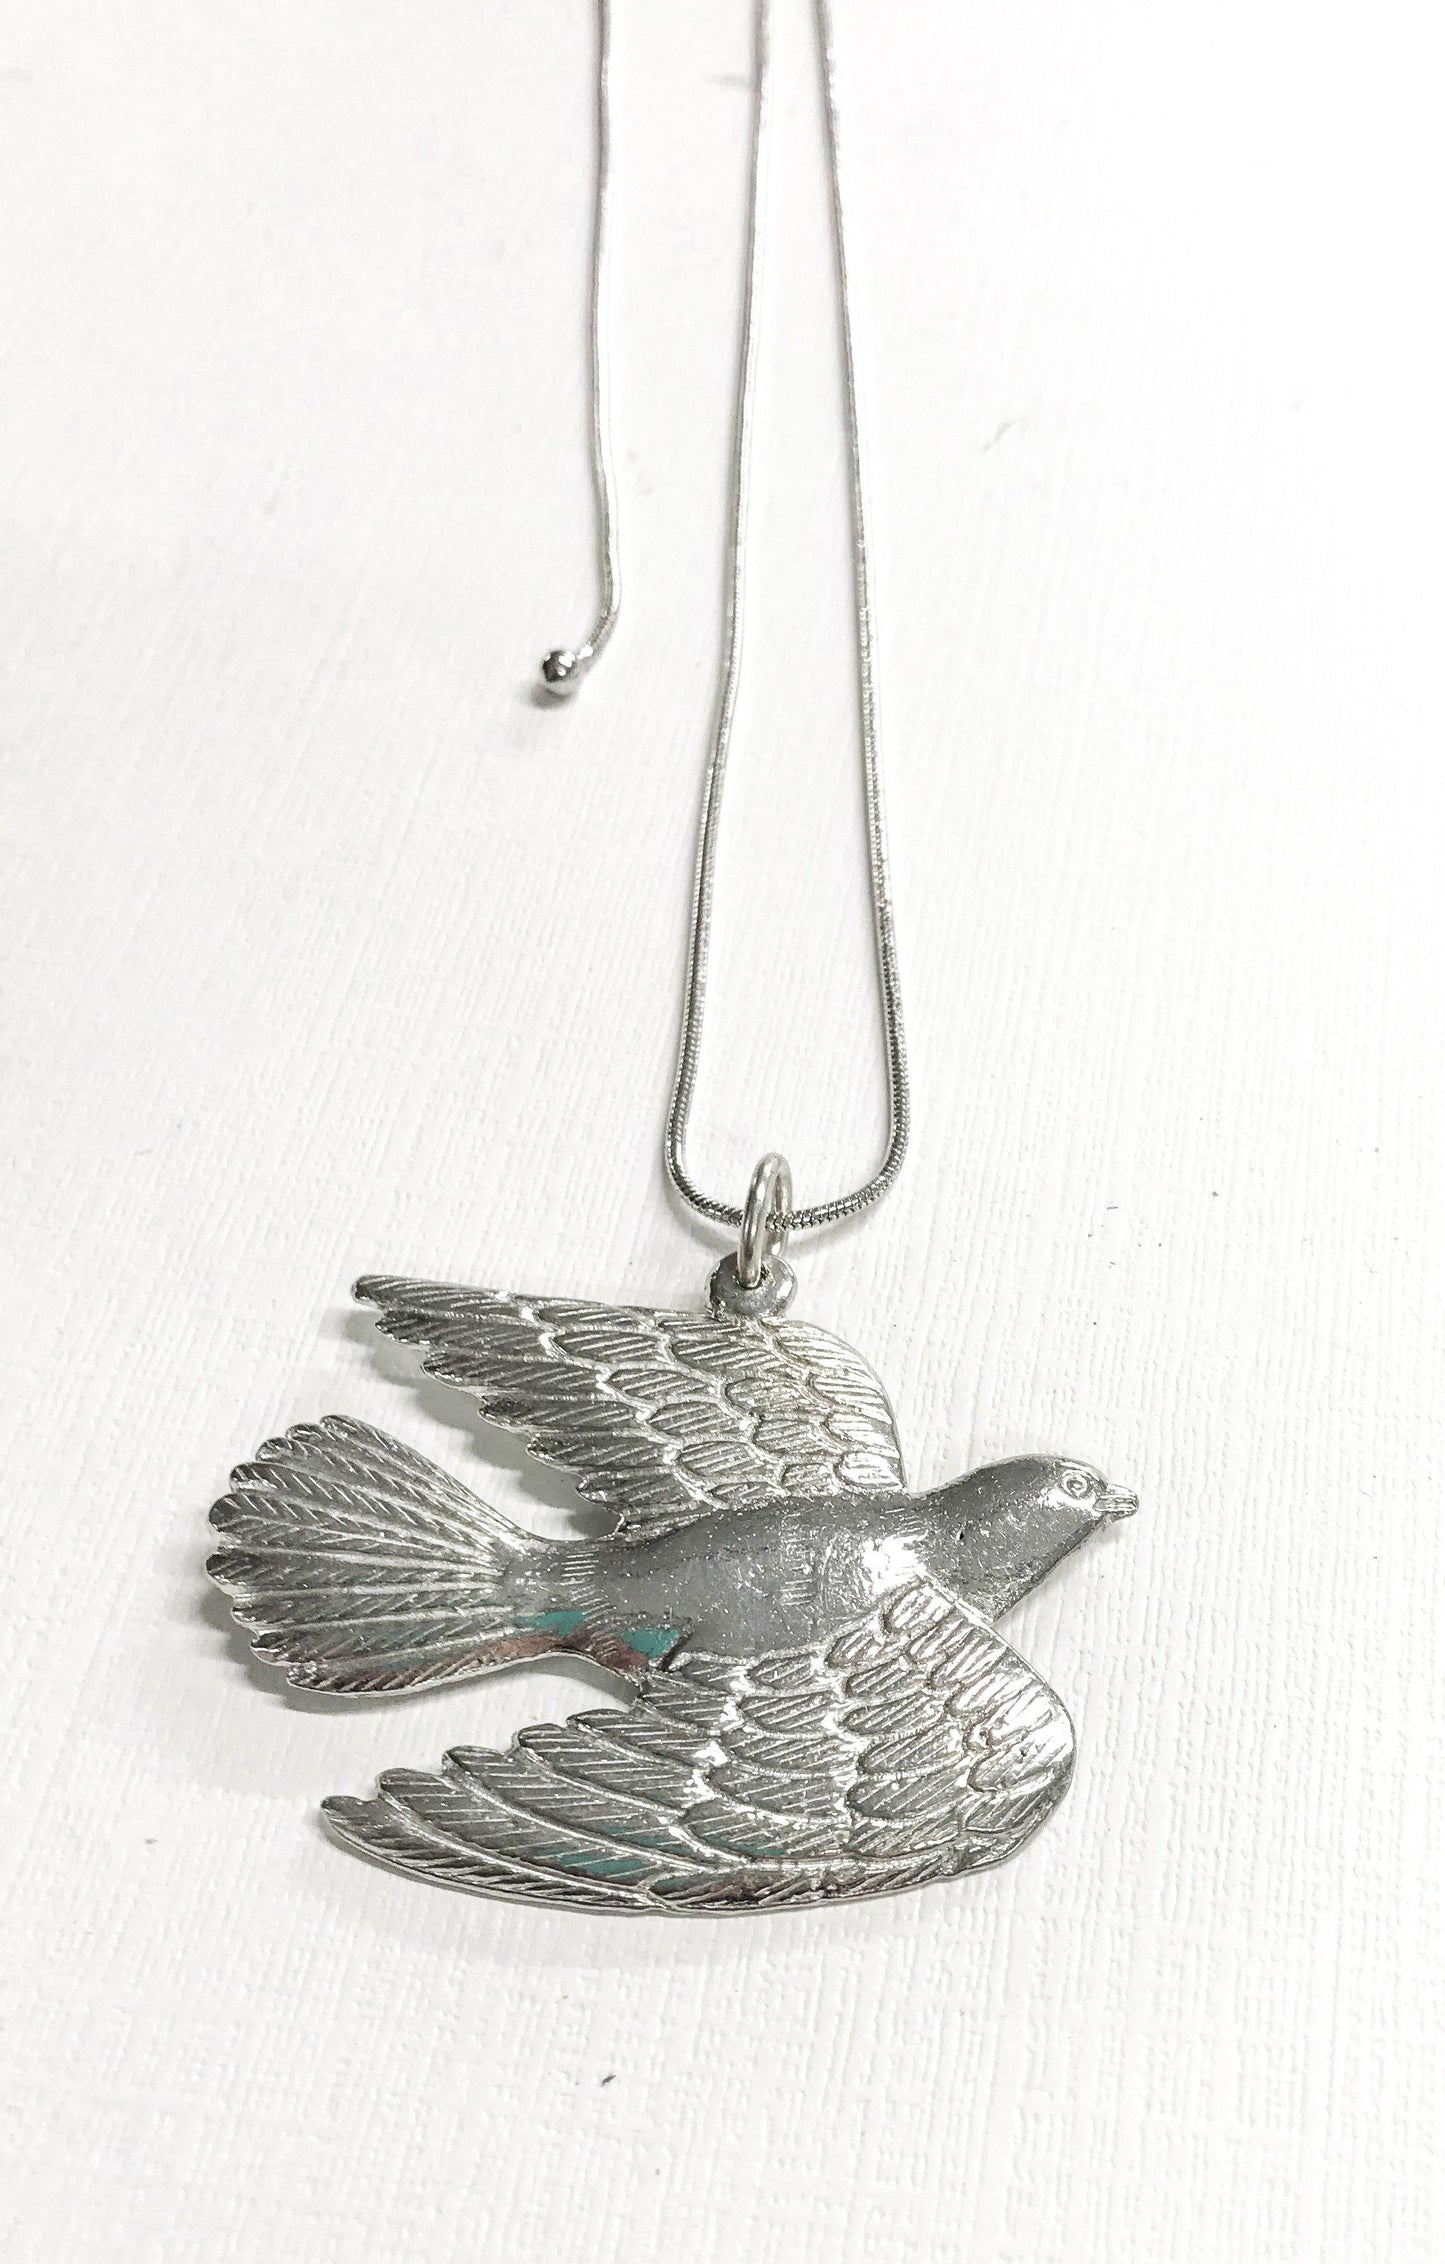 Handmade Pewter Dove Jewelry- Earrings, Necklace, Gift Set - House of Morgan Pewter